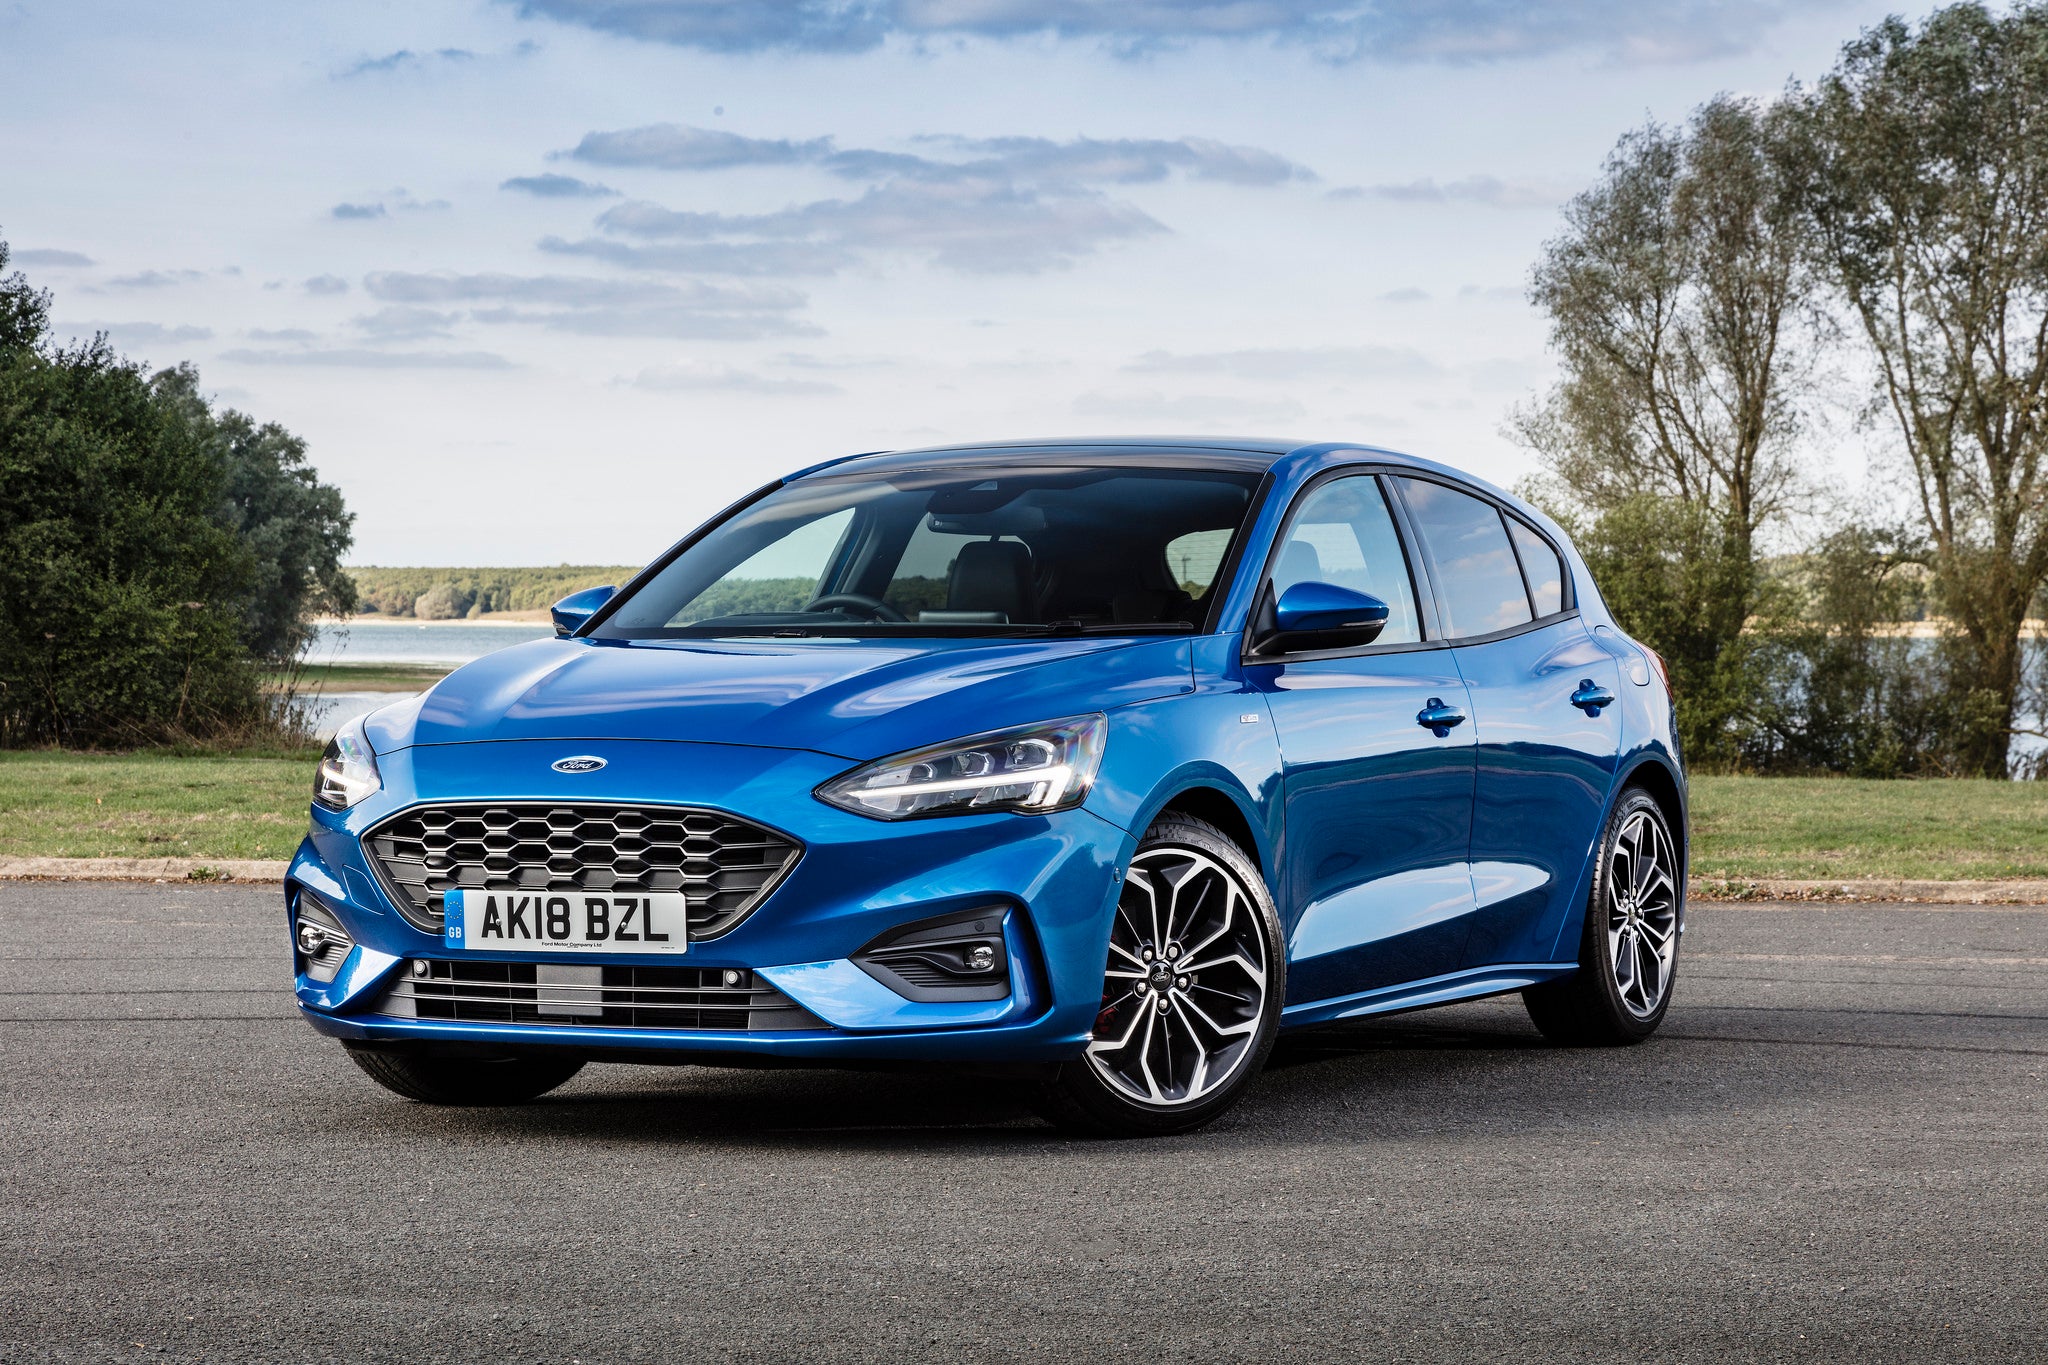 Ford Focus New model is competitive, but not classleading The